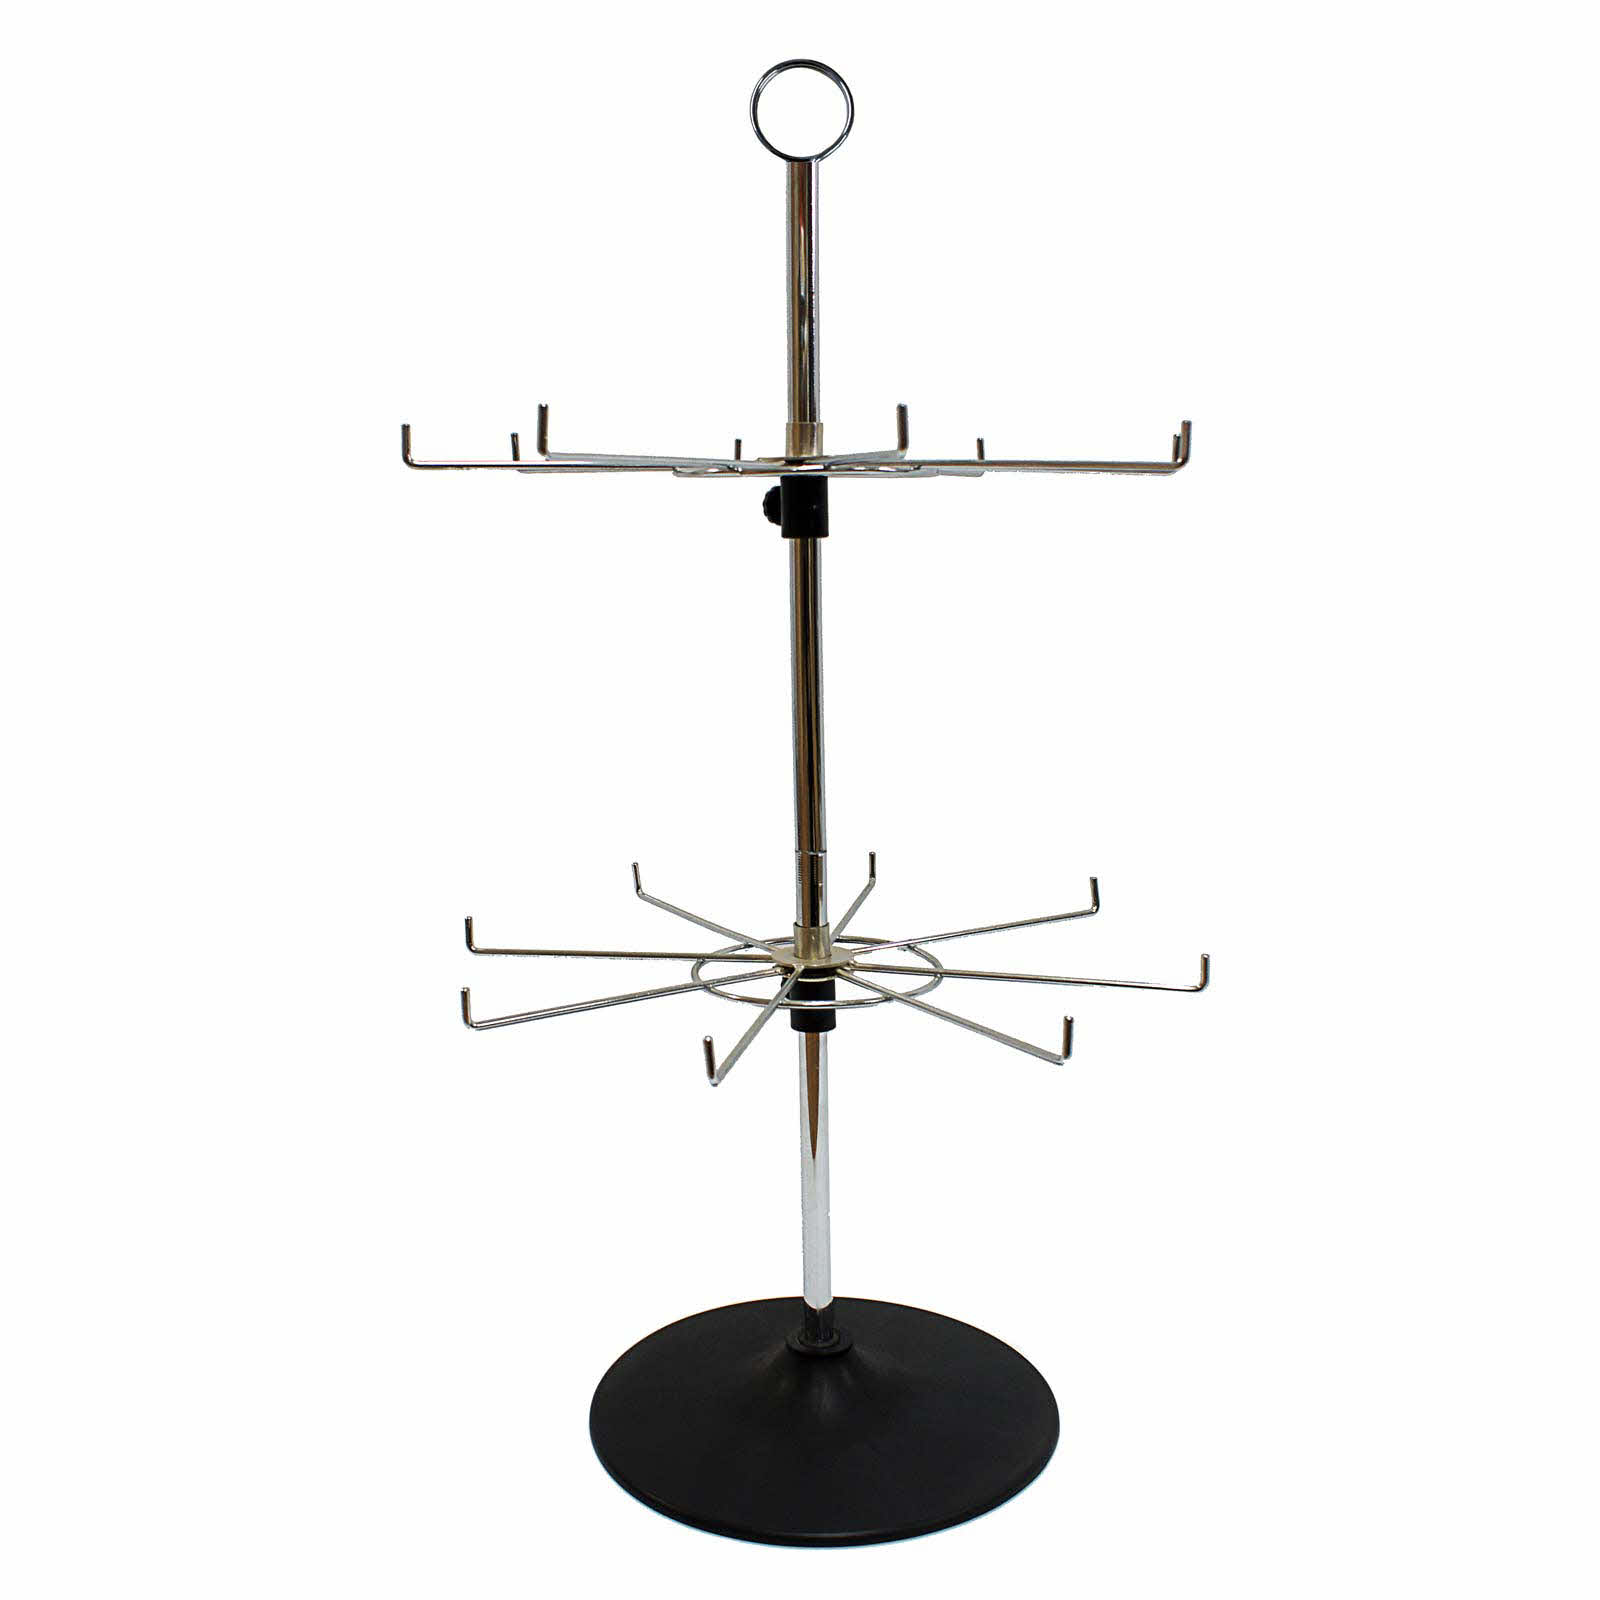 Rotary Hat Display - 2 Adjustable Millinery Tiers Counter Stand in Chrome (J3) 